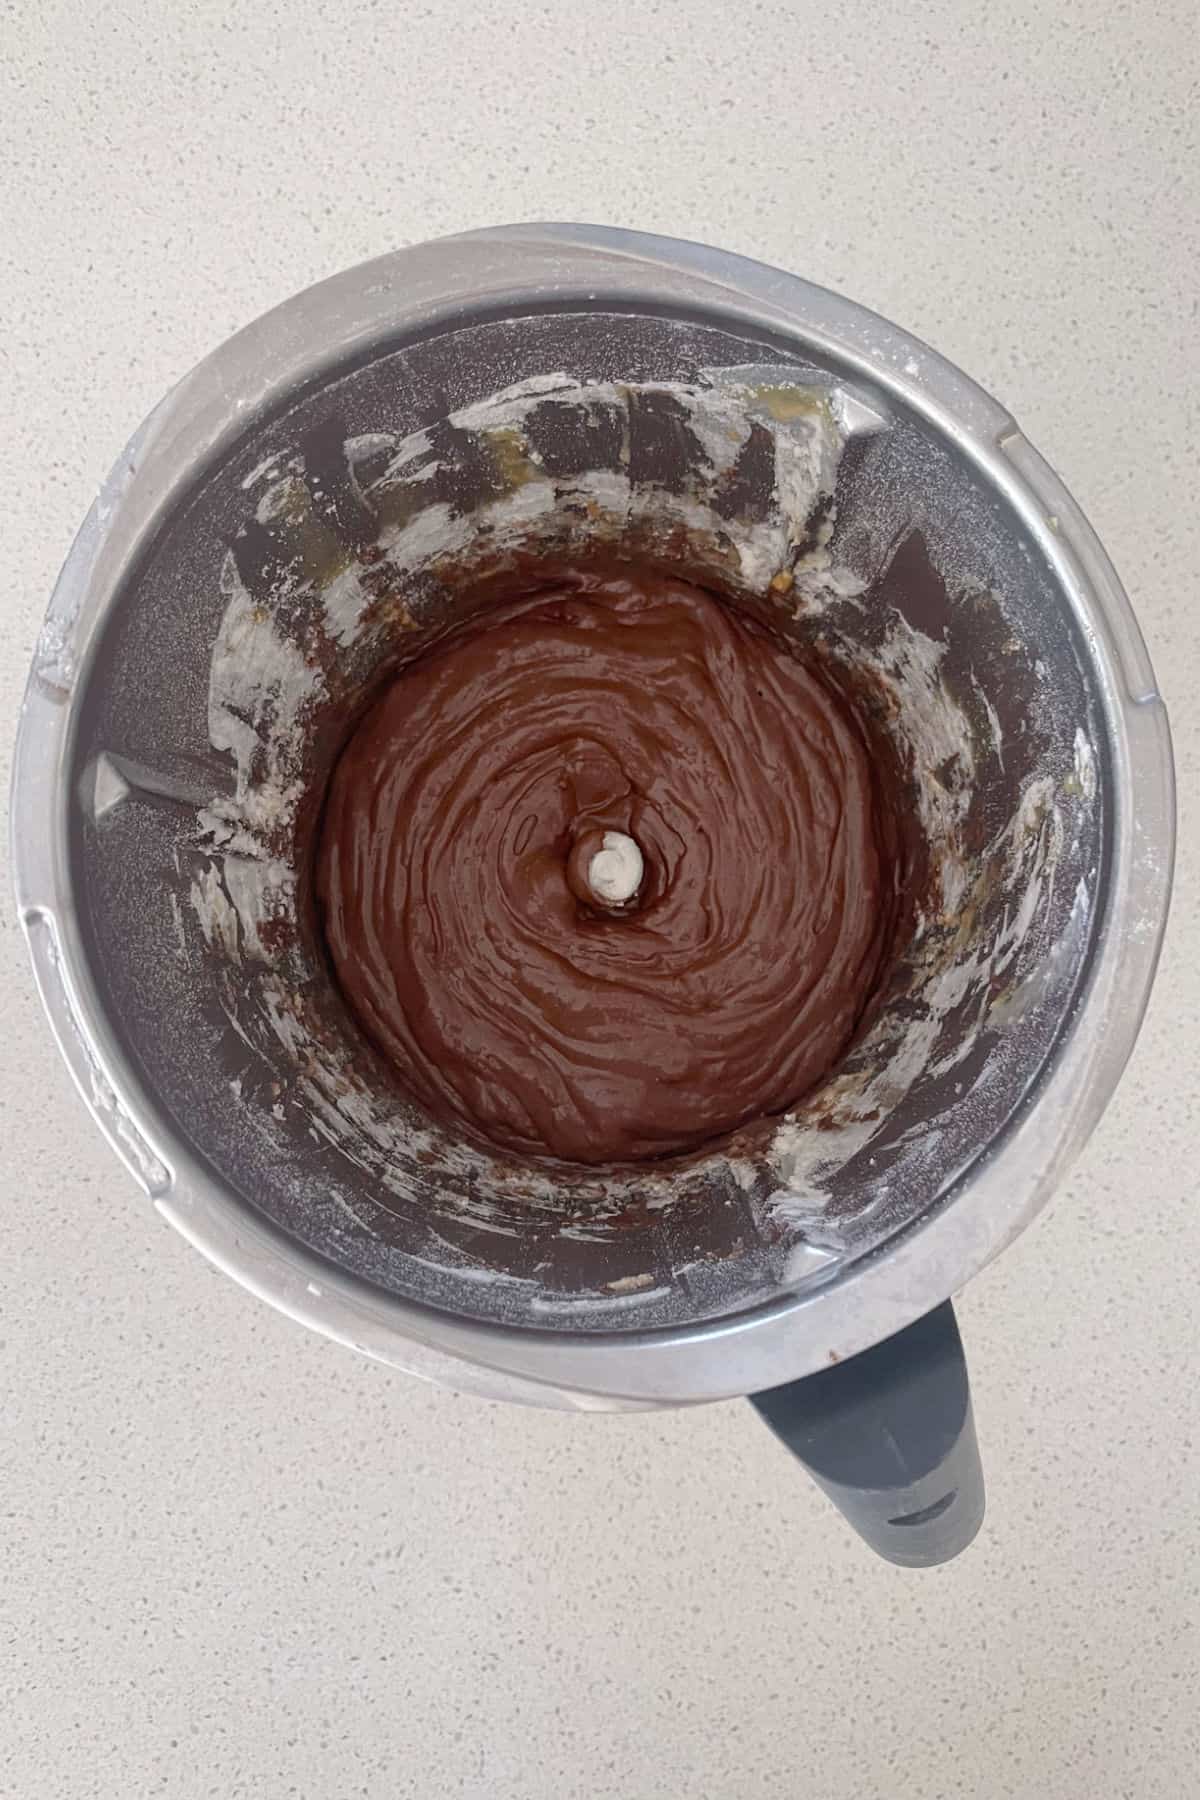 Nutella Brownie mixture combined in a thermomix bowl.